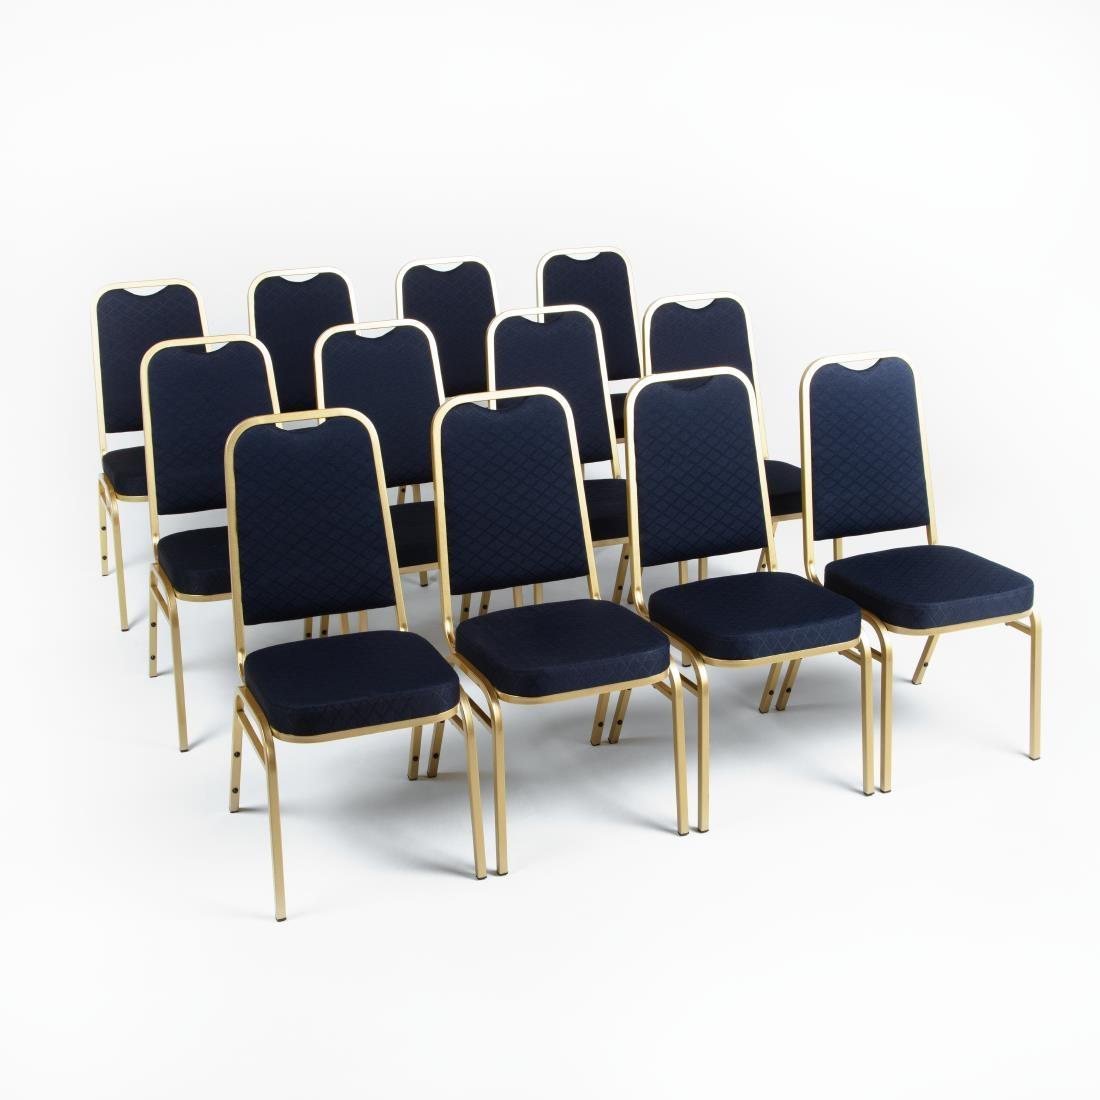 Bolero Square Back Banquet Chairs Blue & Gold (Pack of 4) - DL015  - 5